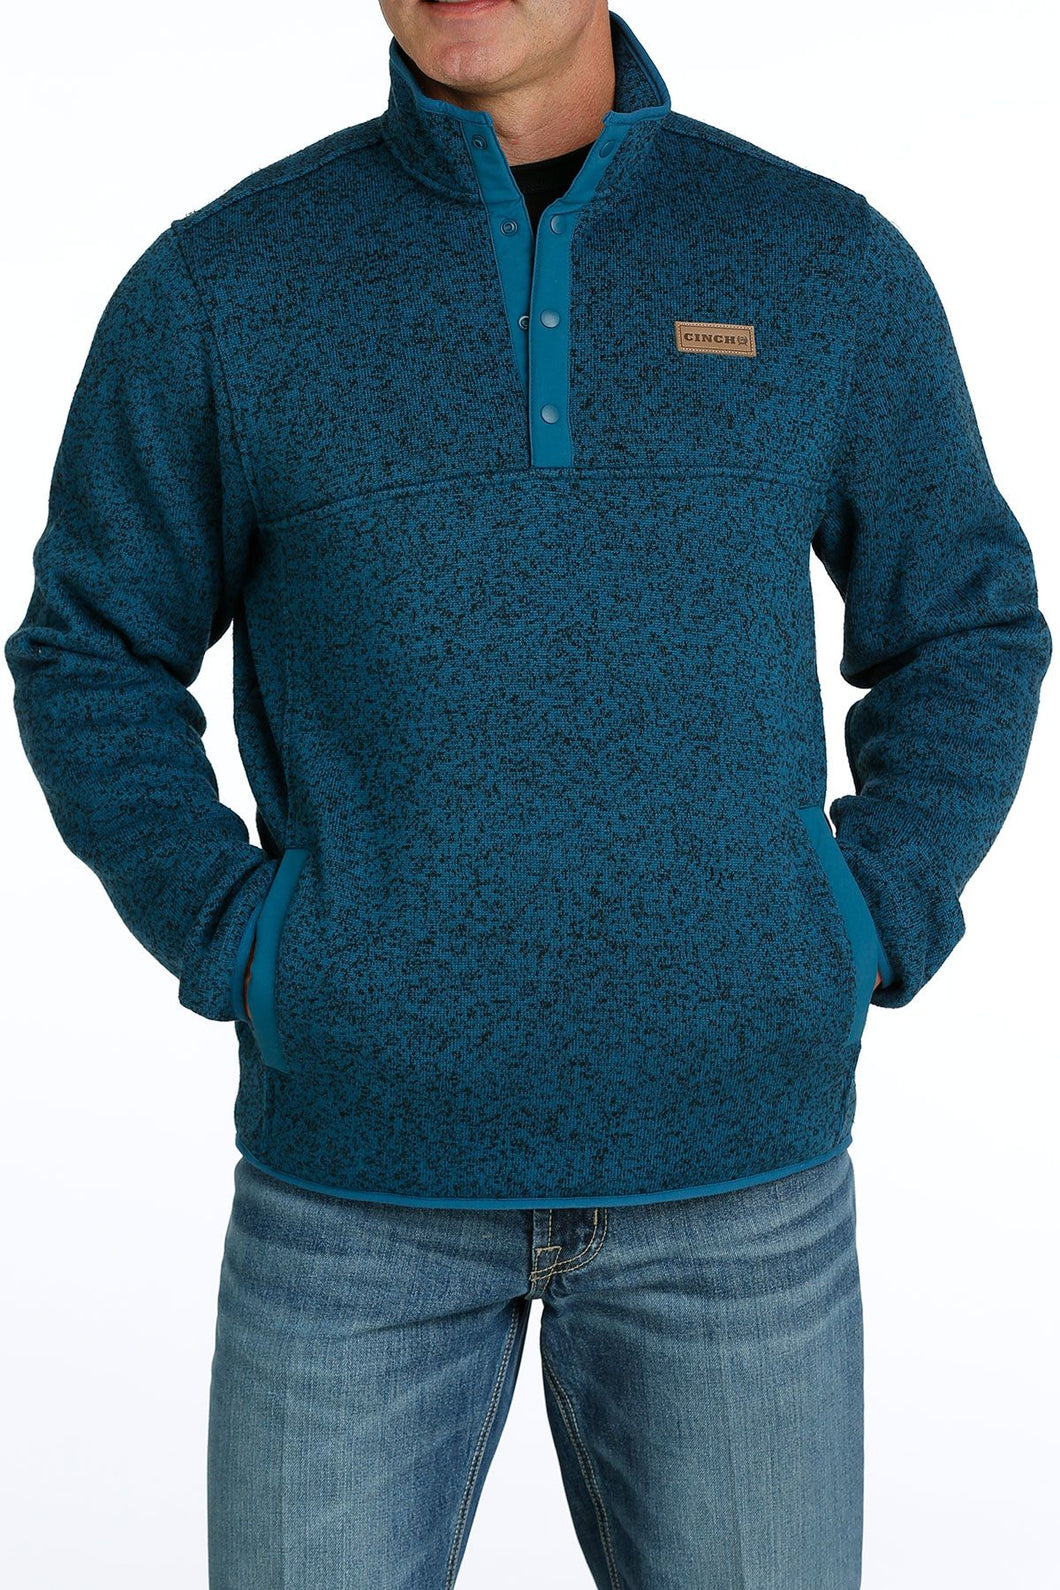 Cinch Reinforced Snap Pullover